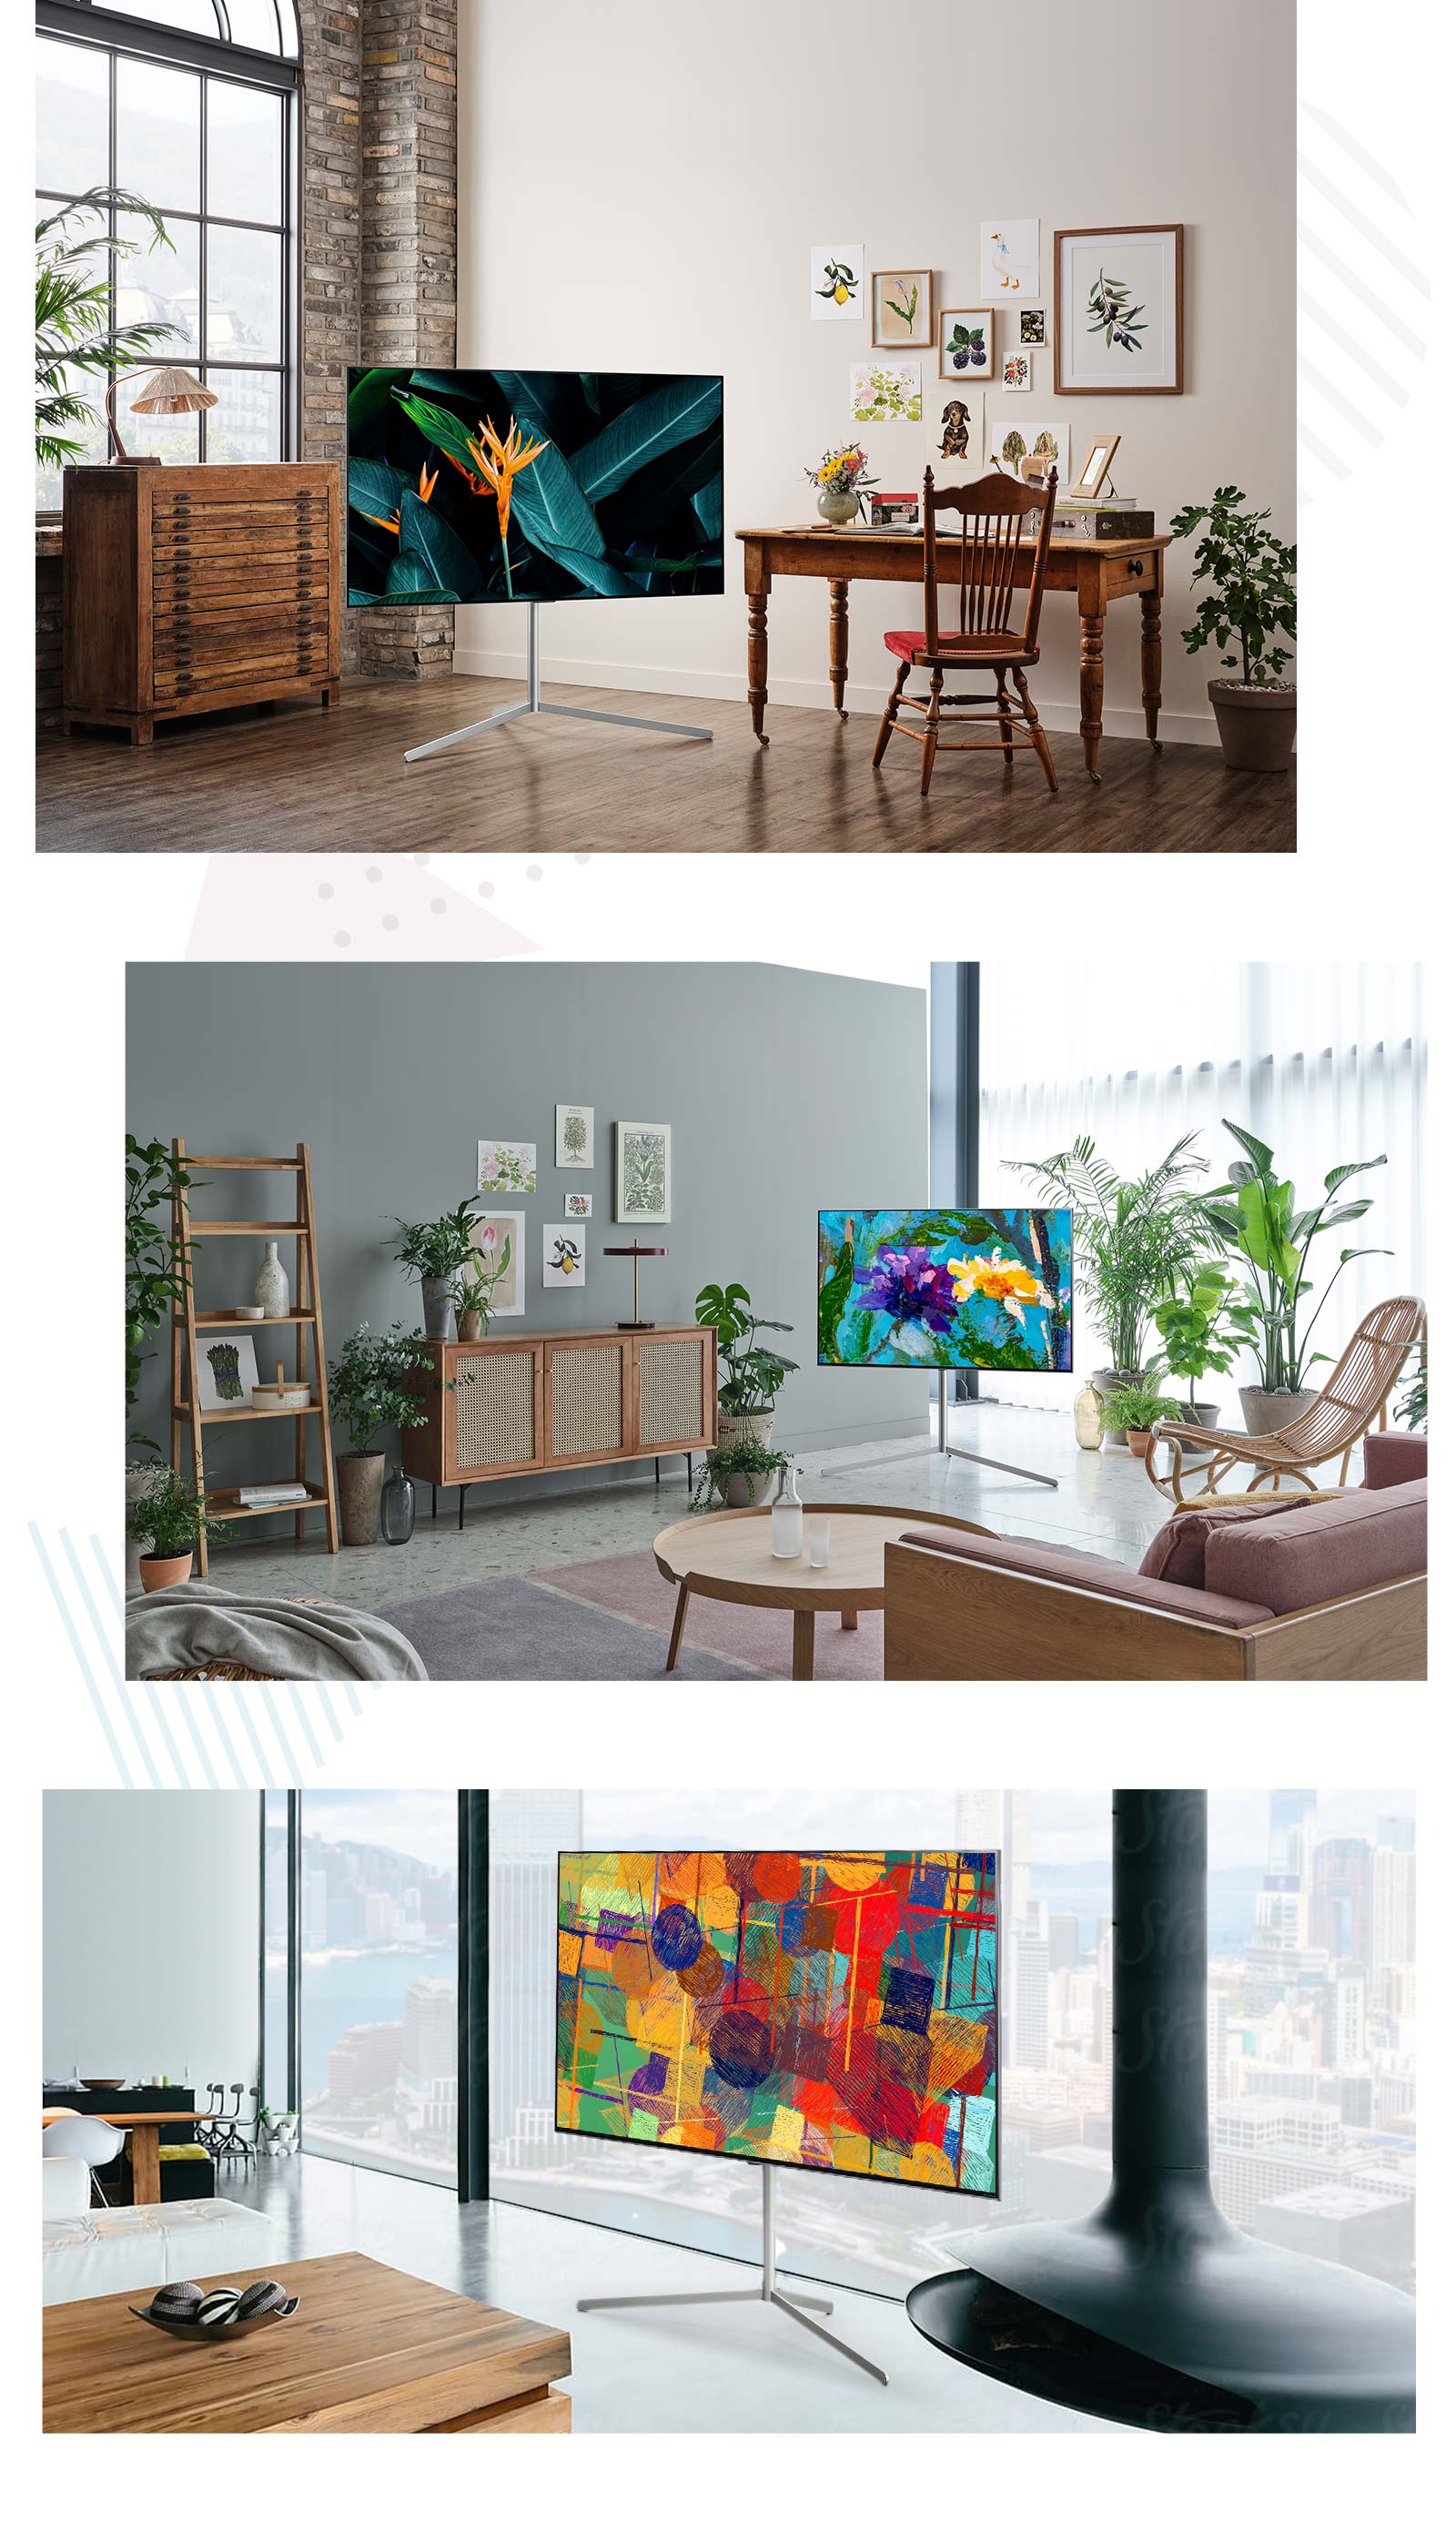 TV stood on the floor with its own stand in a room surrounded by wooden furniture and décor. TV in a modern plant filled interior stood on the floor using its own stand. TV in a modern interior against a window stood on the floor using its own stand.